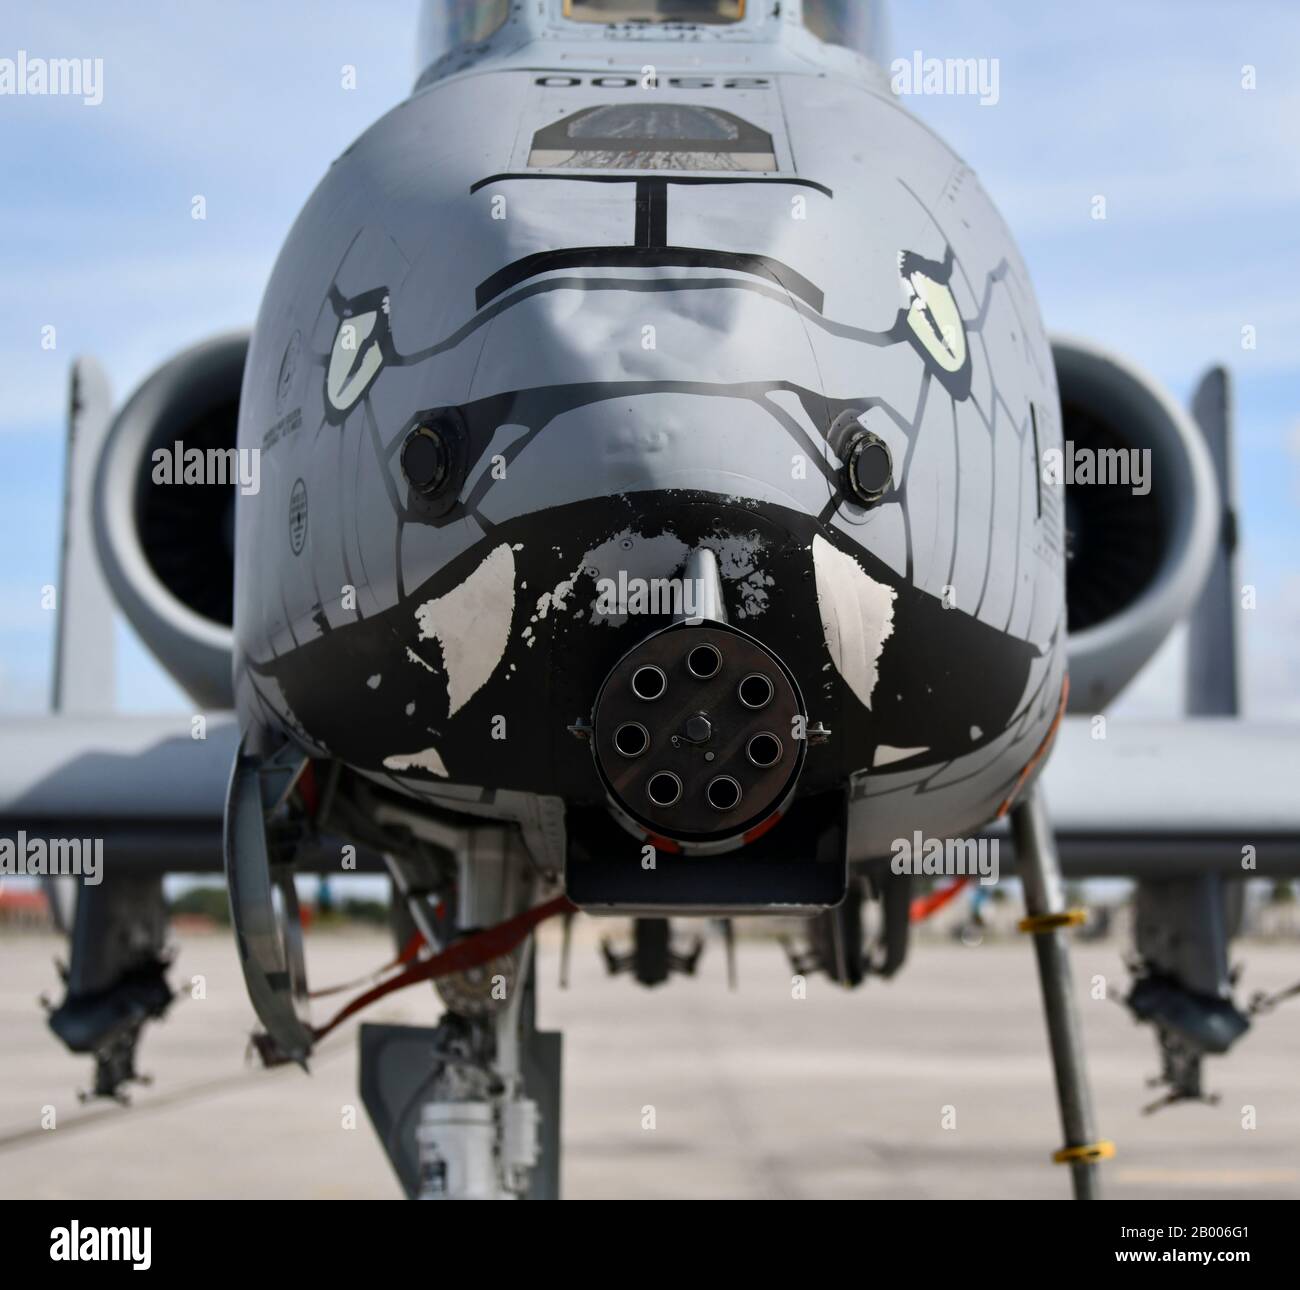 An A-10C Thunderbolt II aircraft with the 122nd Fighter Wing, Fort Wayne, Indiana, sits on the flight line during Southern Strike, Feb. 11, 2020, at MacDill Air Force Base, Florida. The A-10's GAU-8 Avenger 30 mm cannon serves as a Close Air Support 'Tank Buster' for the U.S. Air Force. (U.S. Air National Guard photo by Staff Sergeant Rita Jimenez) Stock Photo